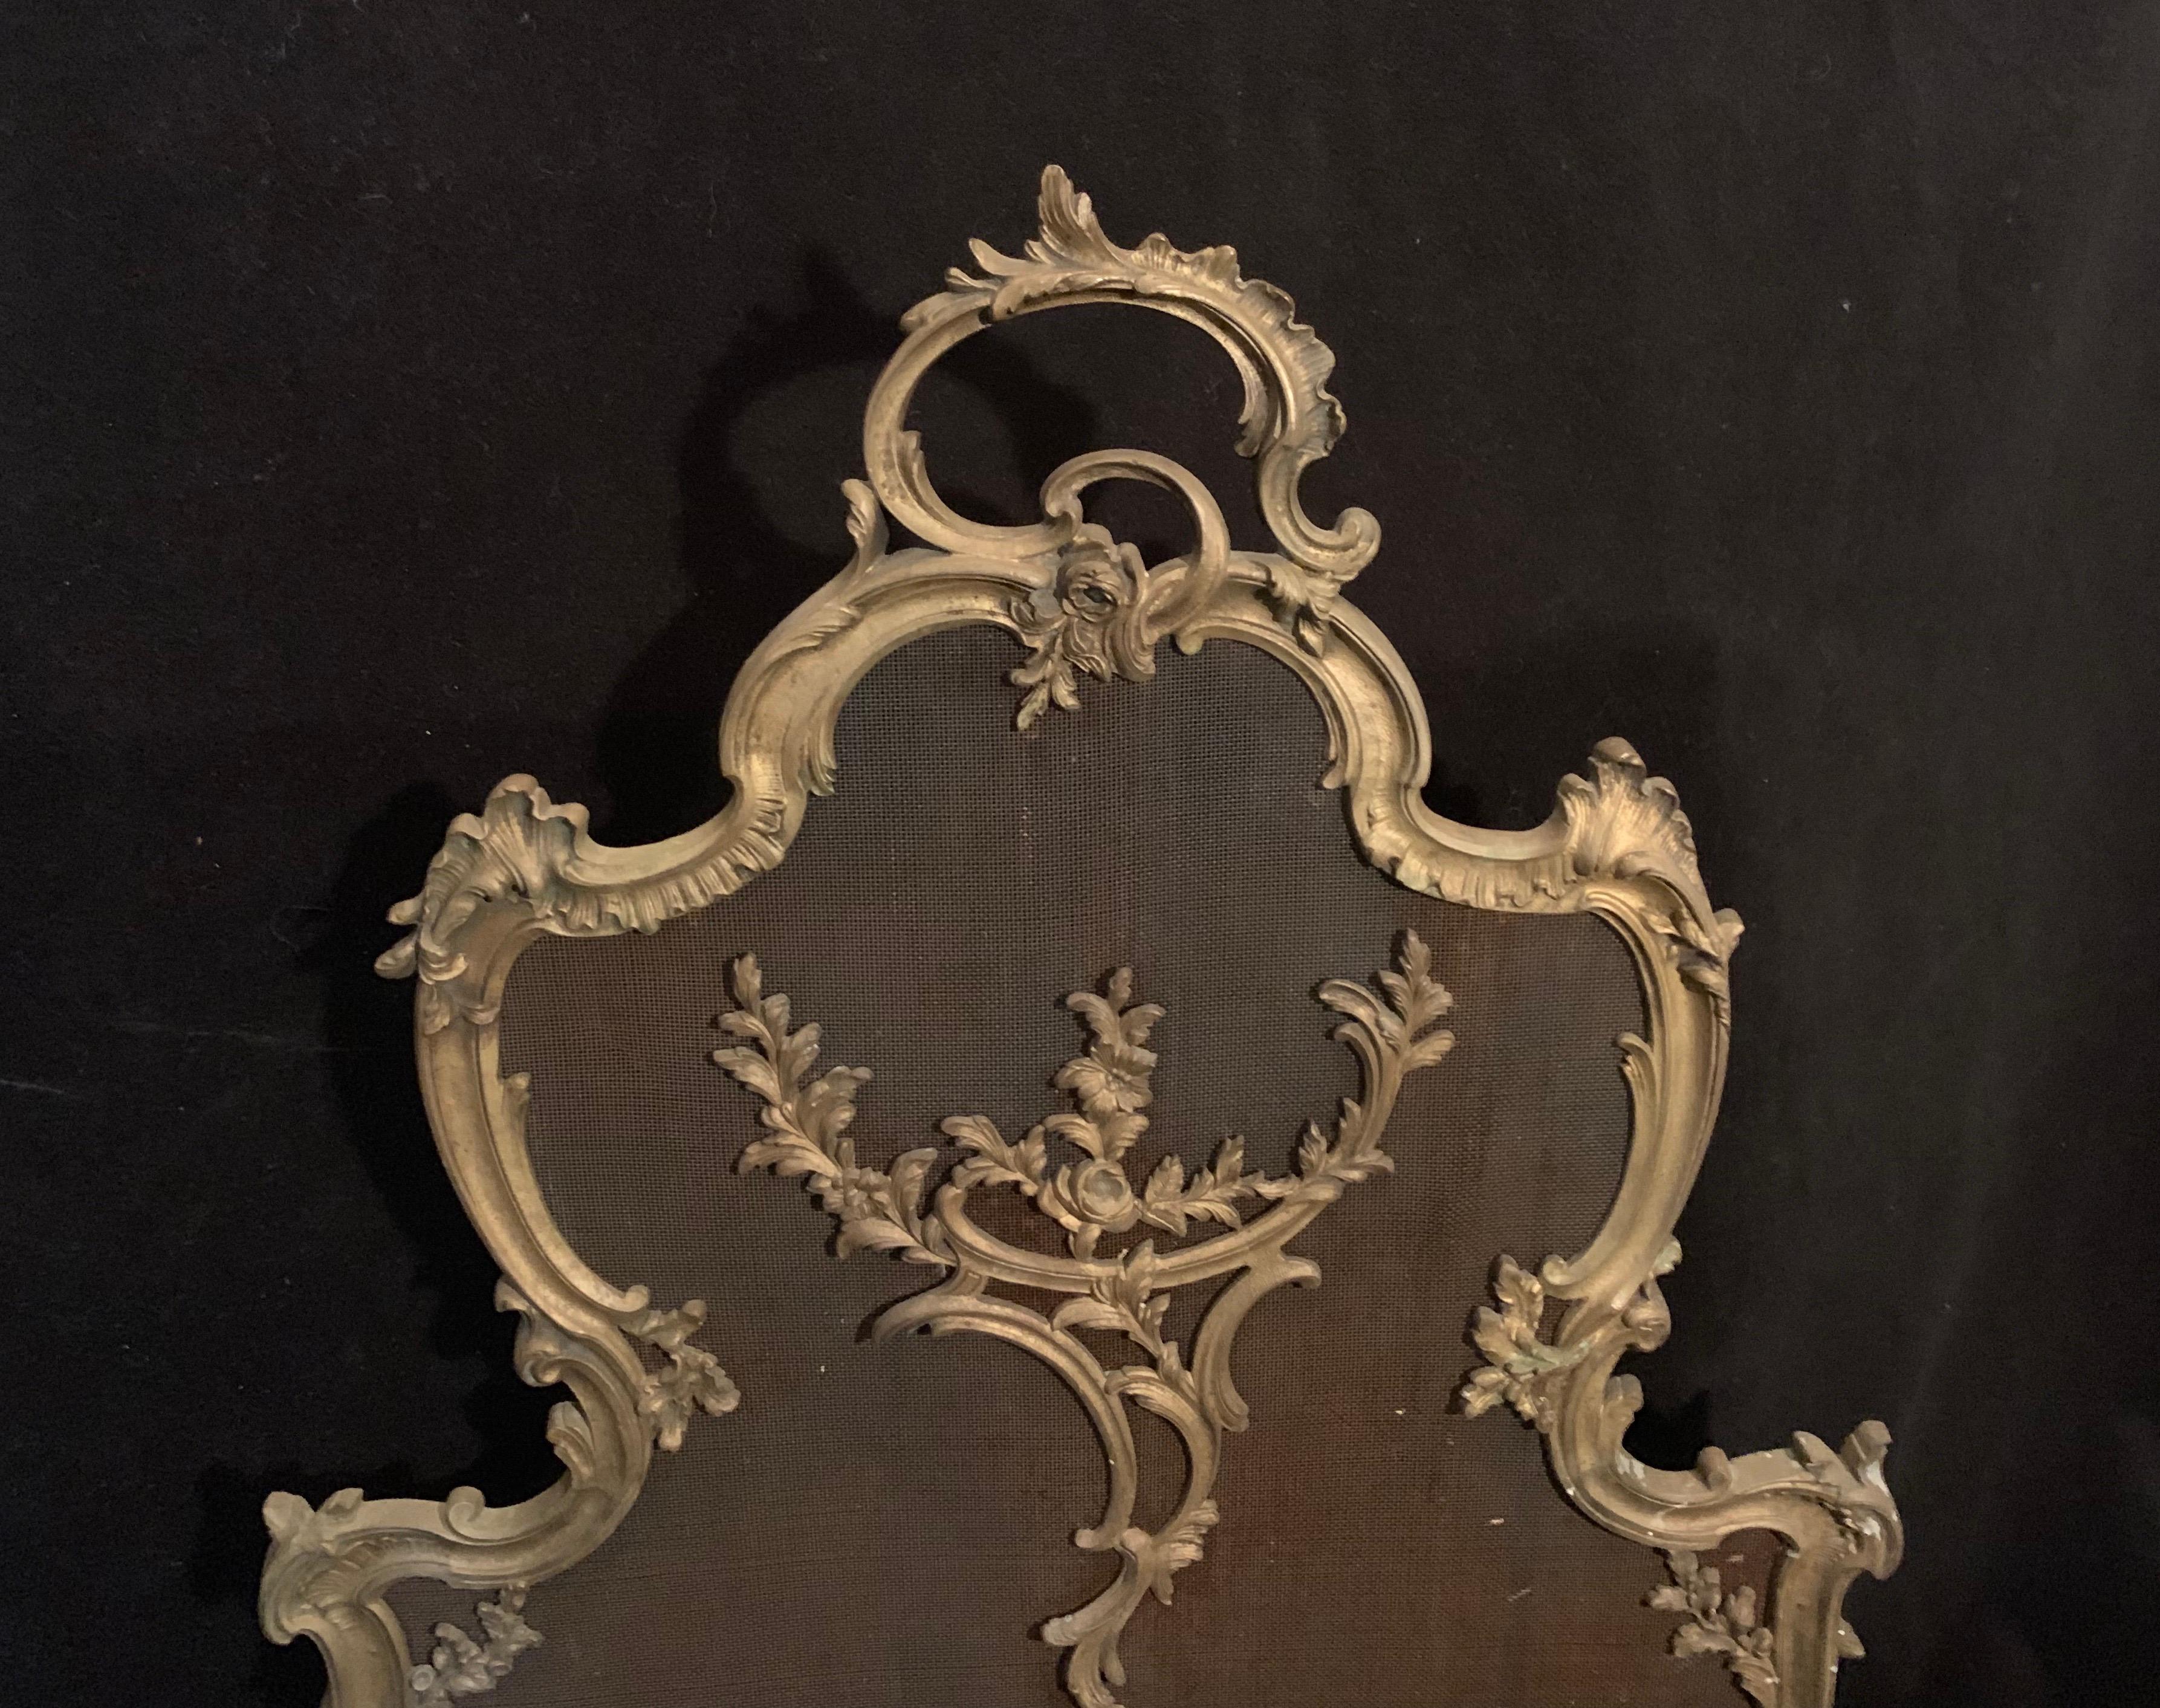 A wonderful French bronze fireplace ormolu fire place screen with flowers & garland in the manner of rococo.